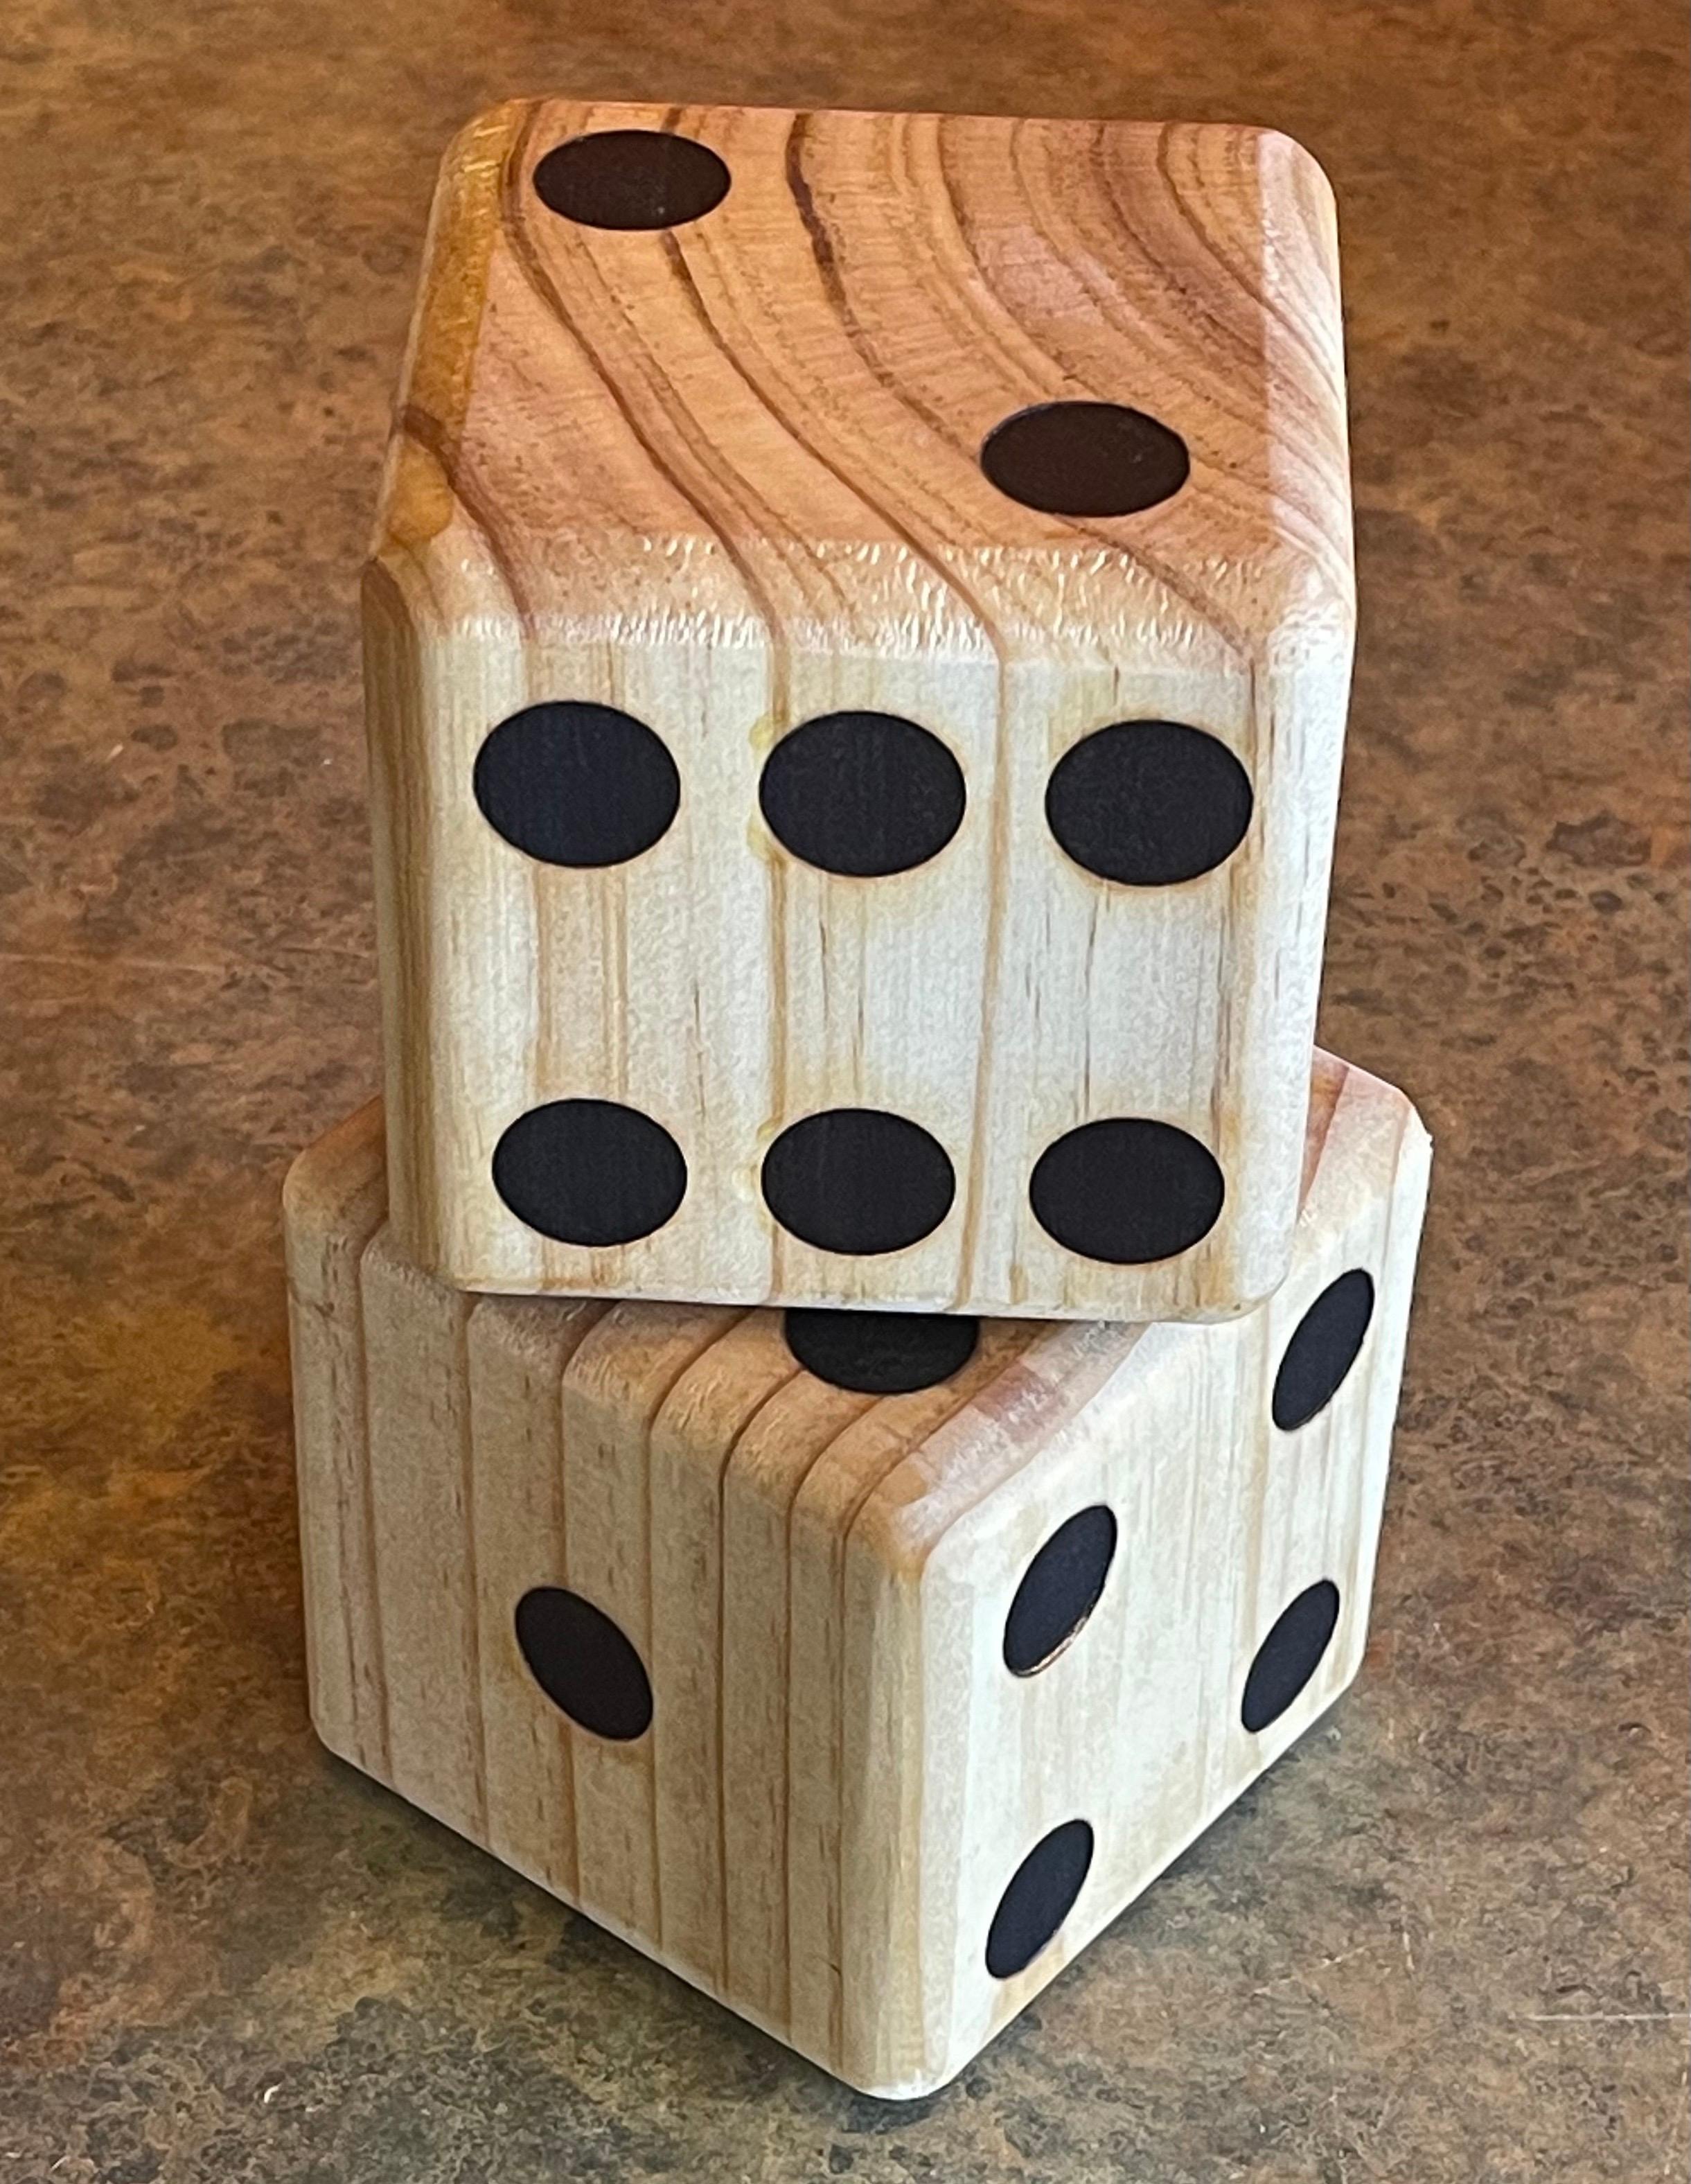 Cool pair of solid oak Mid-Century Modern dice bookends or paperweights, circa 1980s. The dice are 3.5